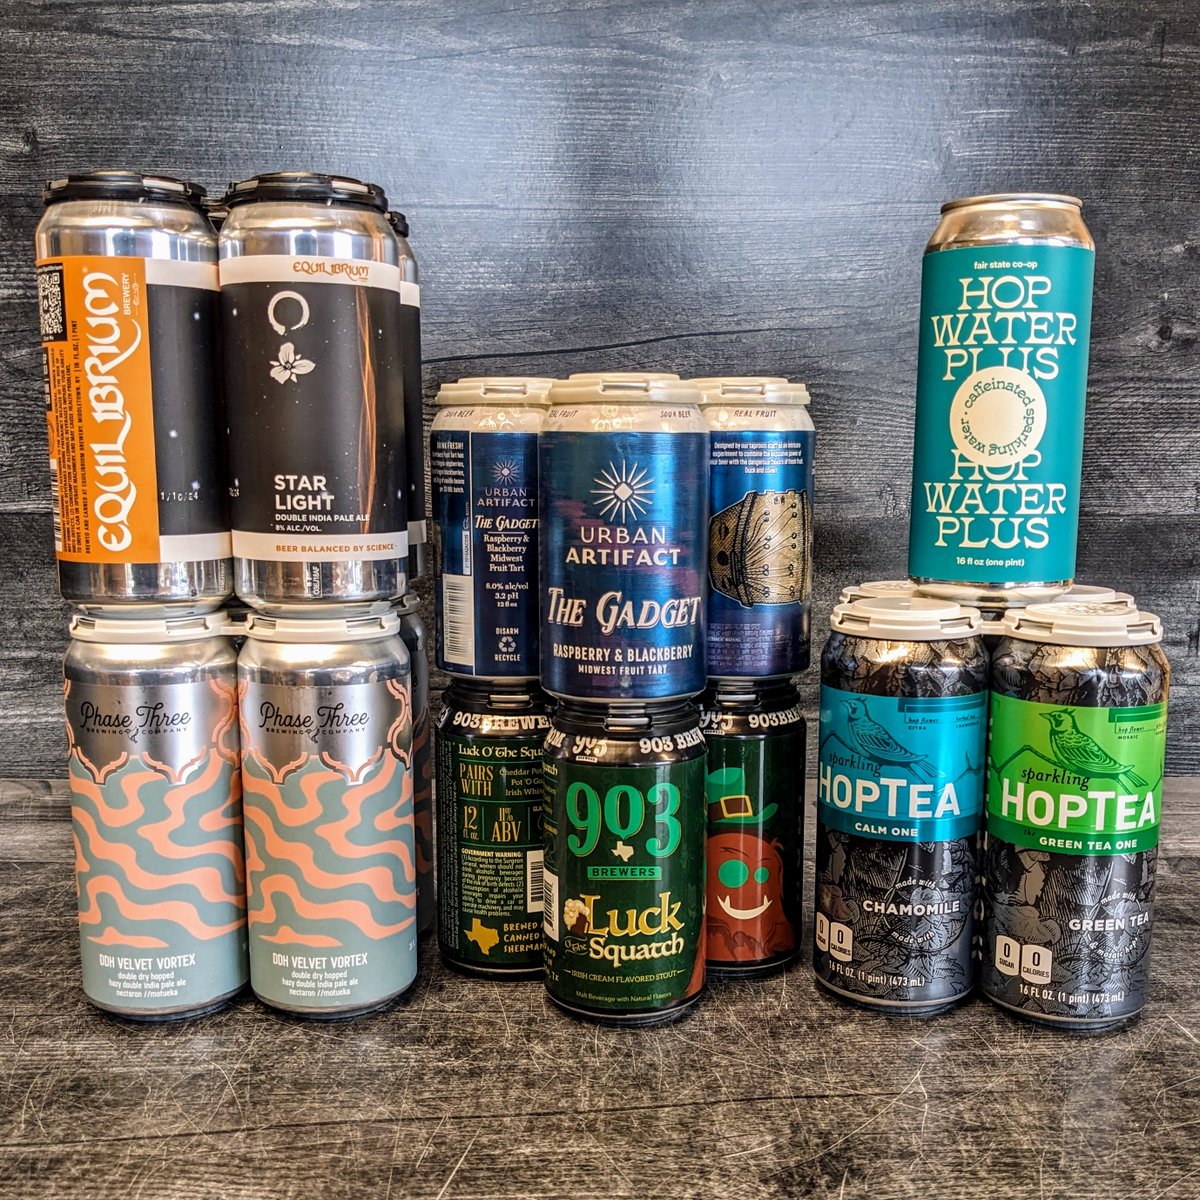 A nice mix of styles for your #BigGame plans!

#DIPA @EQBrewery & @trilliumbrewing collab & new @PhaseThreeBrew #DIPA 

Fruited sour from @UrbanArtifact & #IrishCream #ImperialStout from @903Brewers 

@FairStateCoop #HopWater w/ #Caffiene and @drinkhoplark #HopTea #VarietyPack